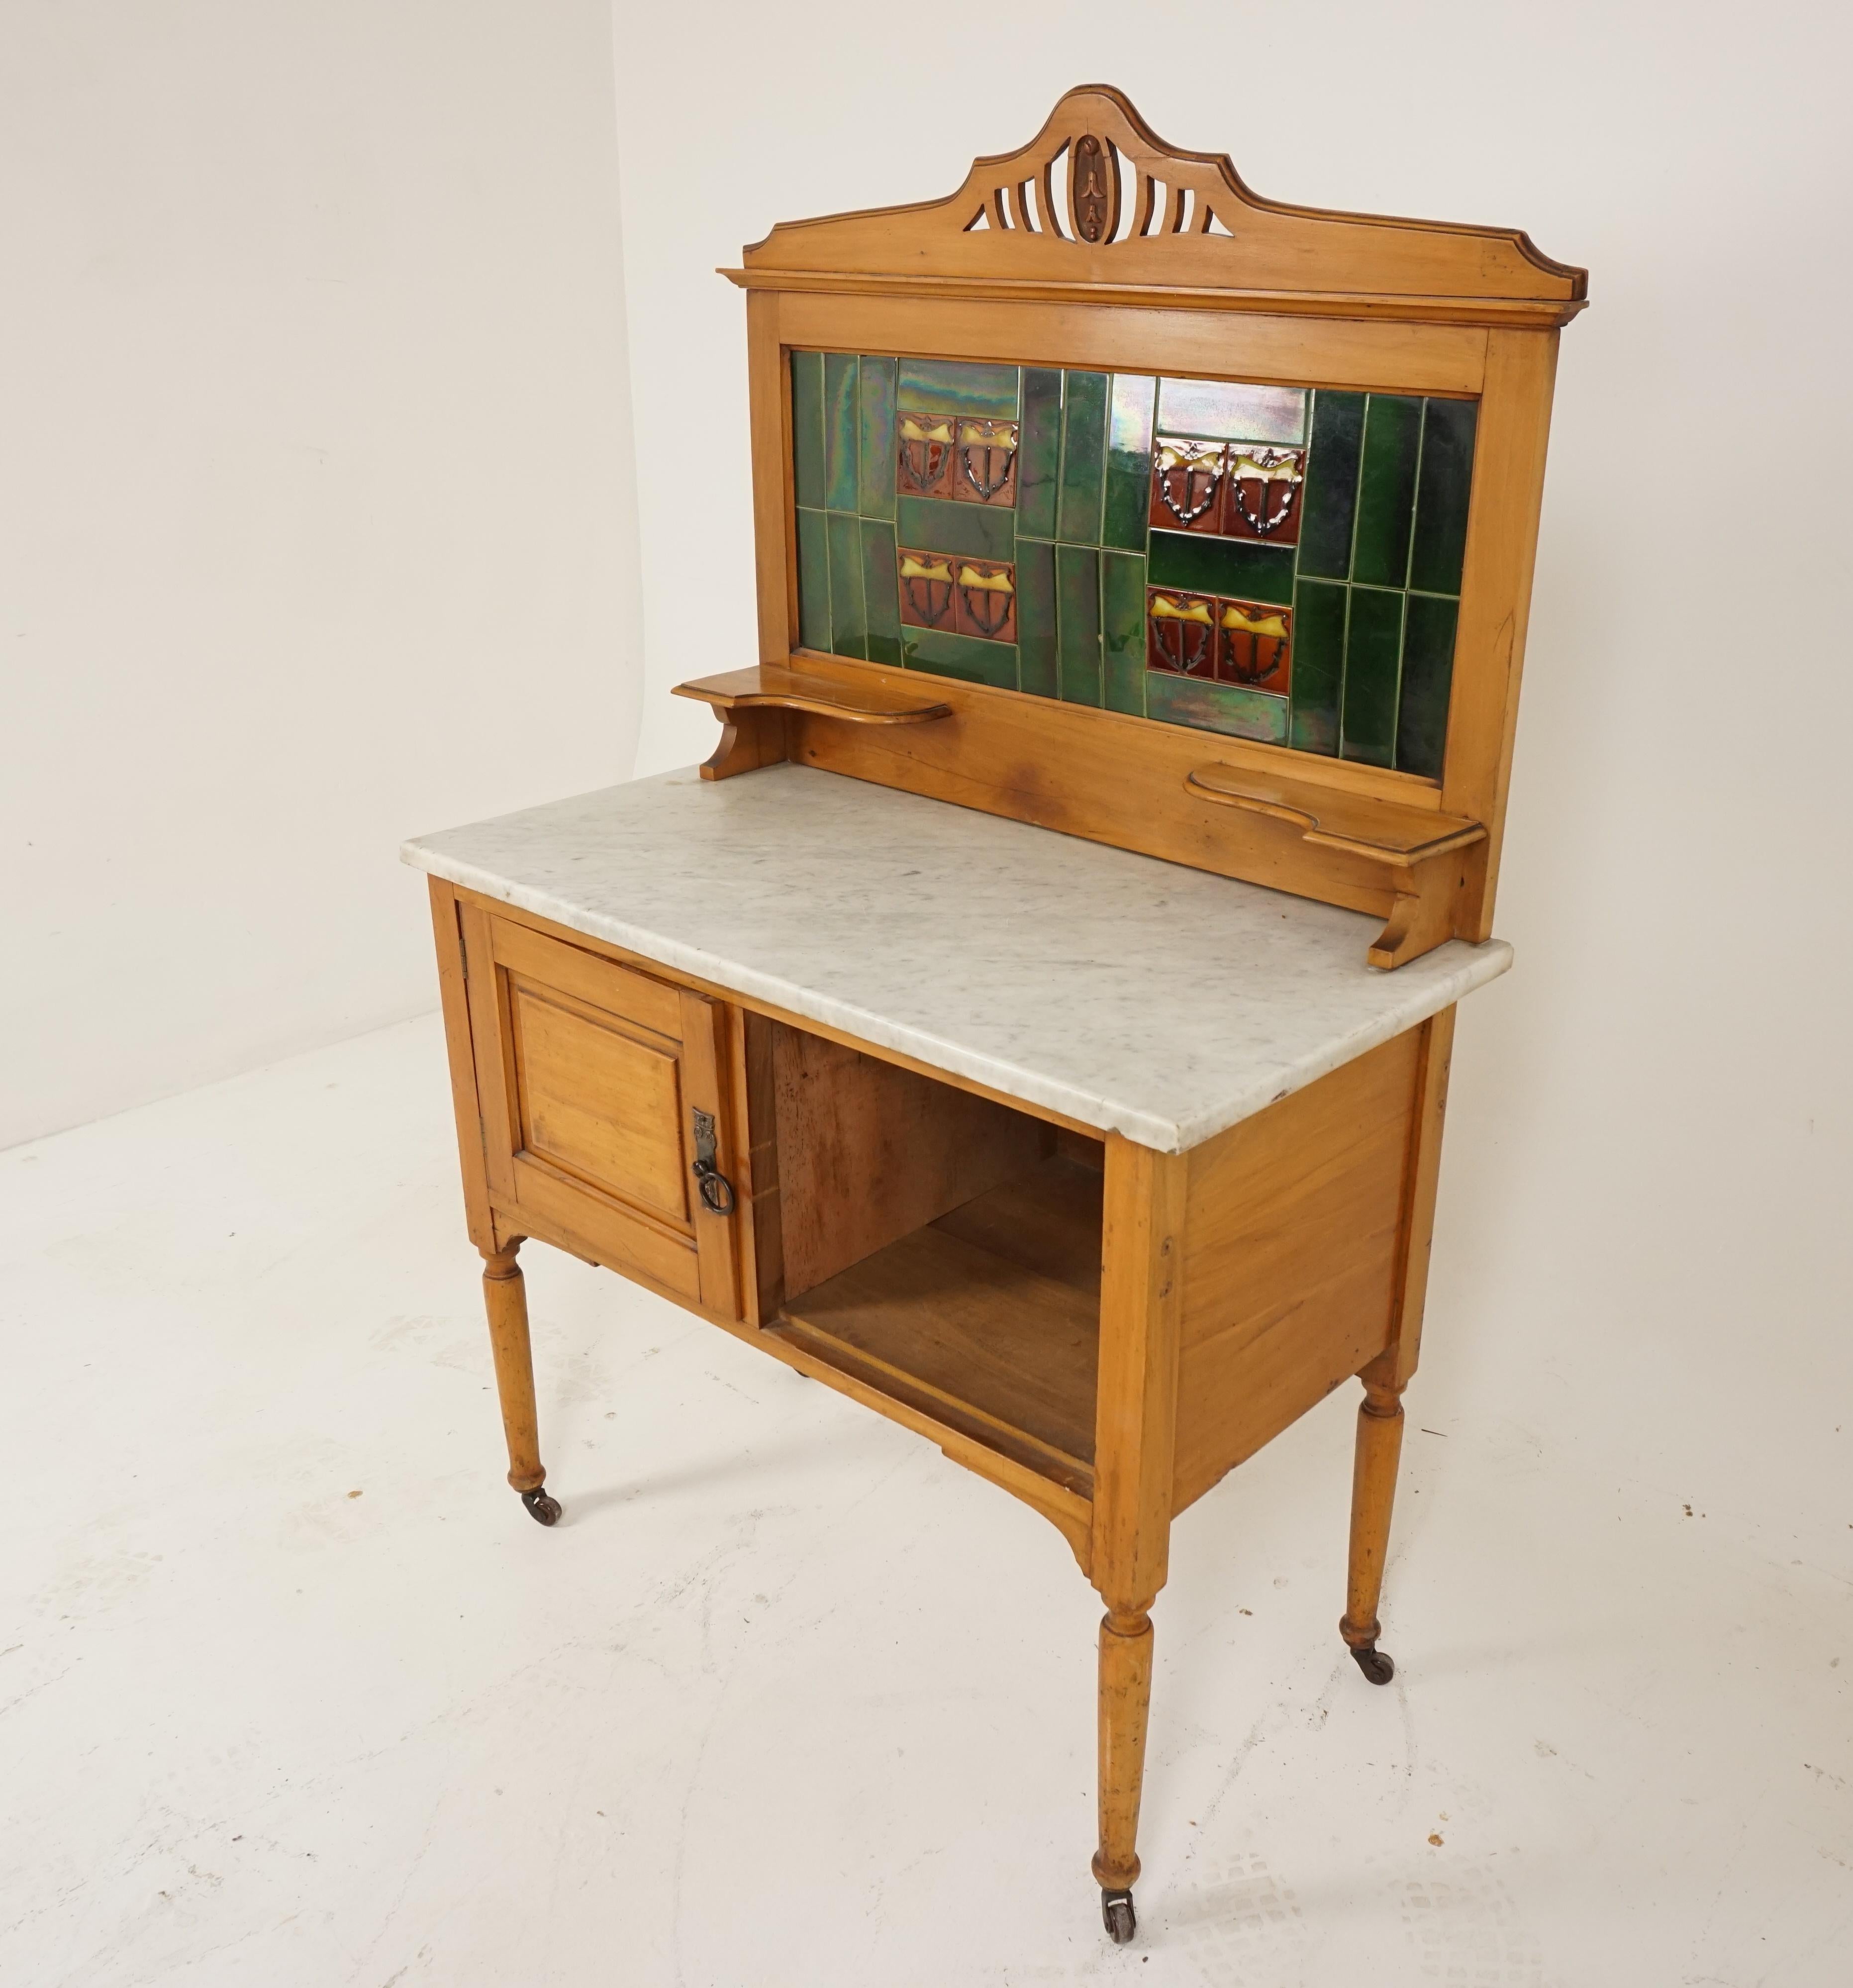 Antique Victorian satin walnut marble top washstand with tiles, Scotland 1900, B2792

Scotland 1900
Solid walnut
Original finish
Carved pediment on top
Colourful tiles to the back splash
Original white marble
Pair of candle shelves
Base